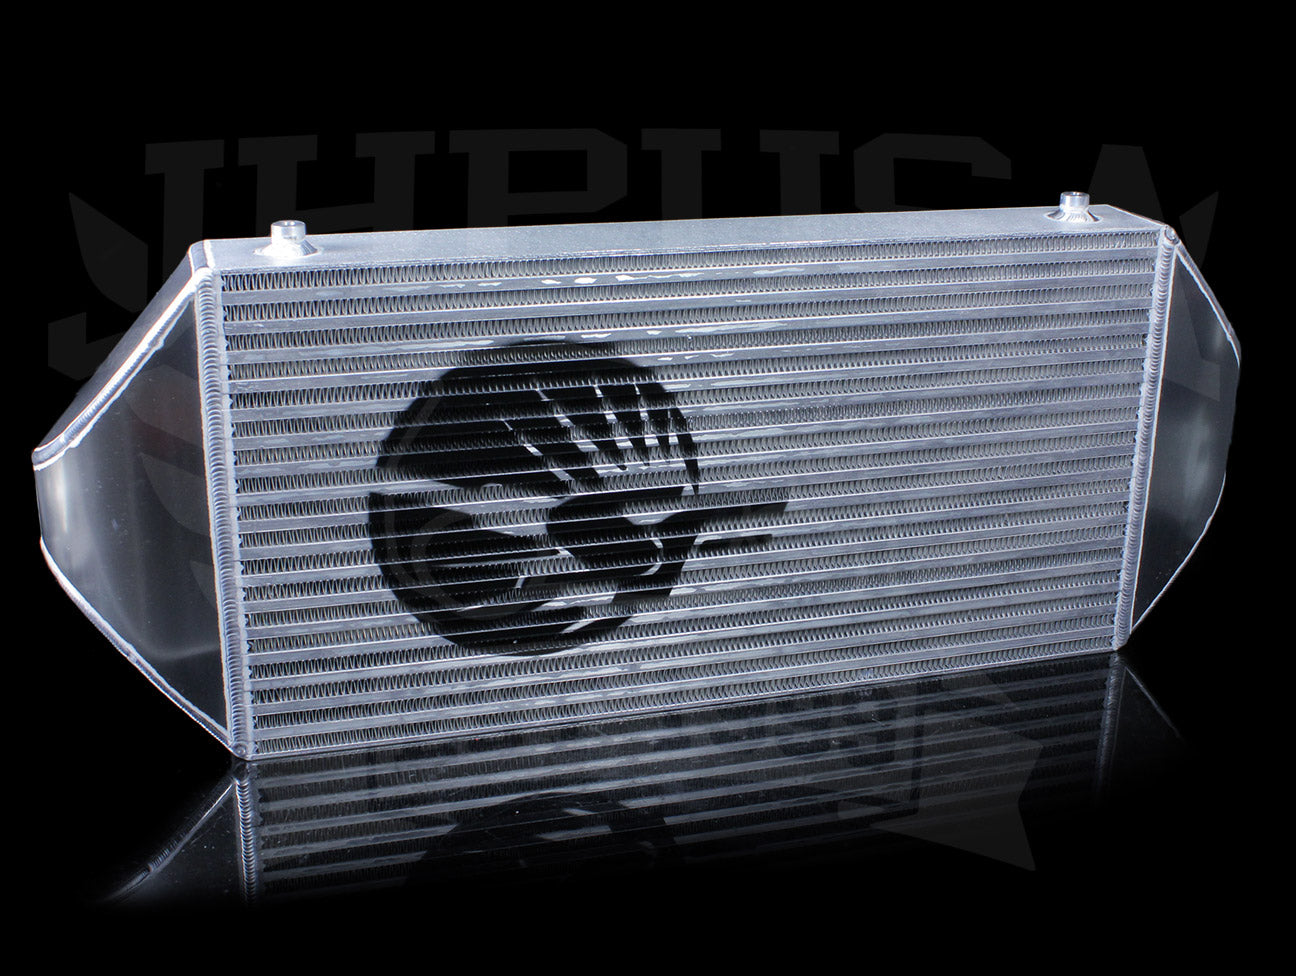 SpeedFactory Racing "Street" Side Inlet/Outlet Universal Front Mount Intercooler - 2.5" Inlet / 2.5" Outlet (300HP-500HP)